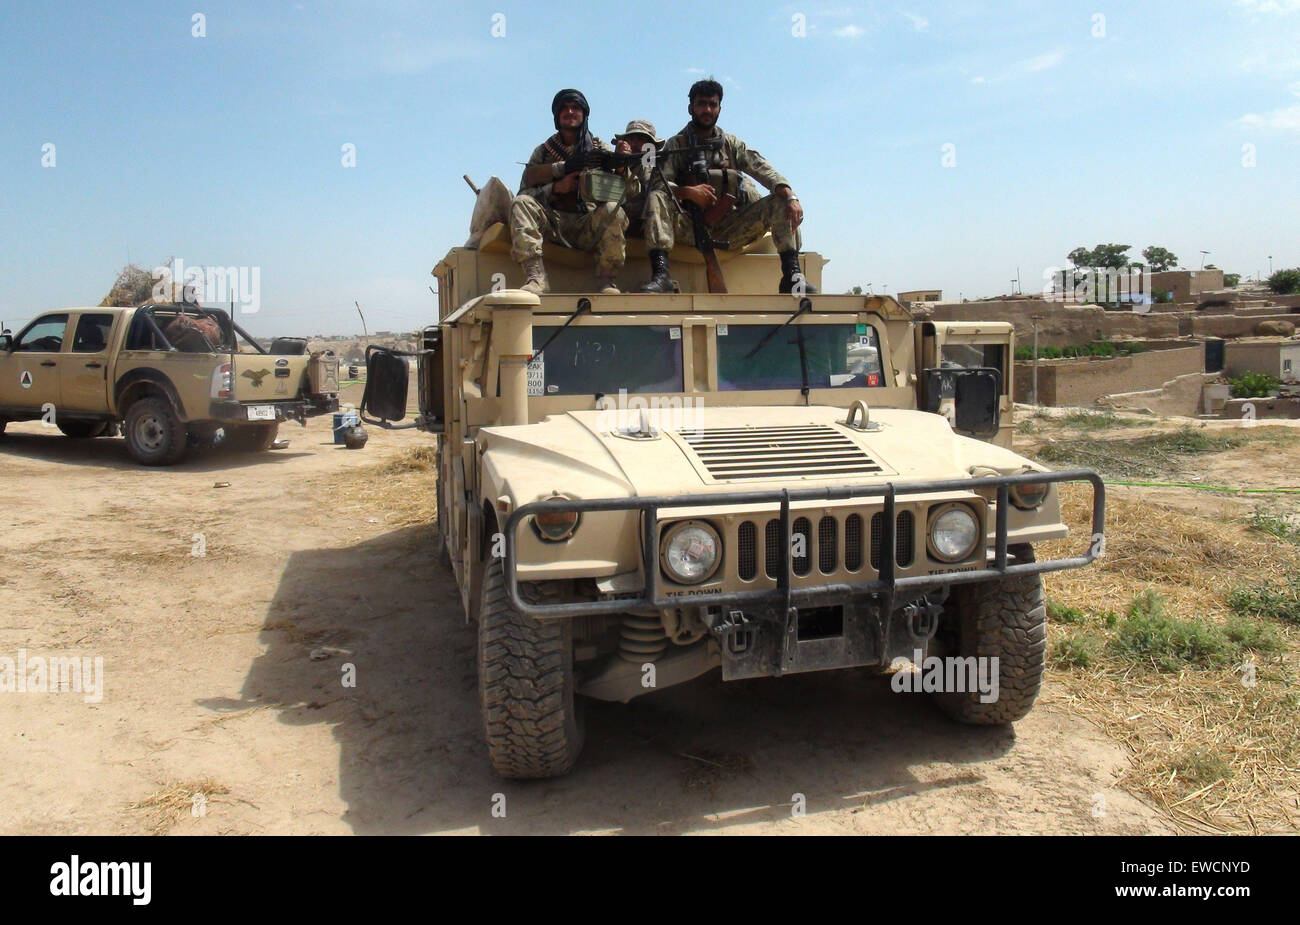 (150623) -- KUNDUZ, June 23, 2015 (Xinhua) -- Afghan soldiers keep watch on a military vehicle during an operation against Taliban in Kunduz province, northern Afghanistan, June 23, 2015. Afghan National Security Forces (ANSF) on Tuesday recaptured a district in northern province of Kunduz seized by Taliban militants over the weekend, killing over 80 rebels, provincial government spokesman said. (Xinhua/Ajmal) (zjy) Stock Photo